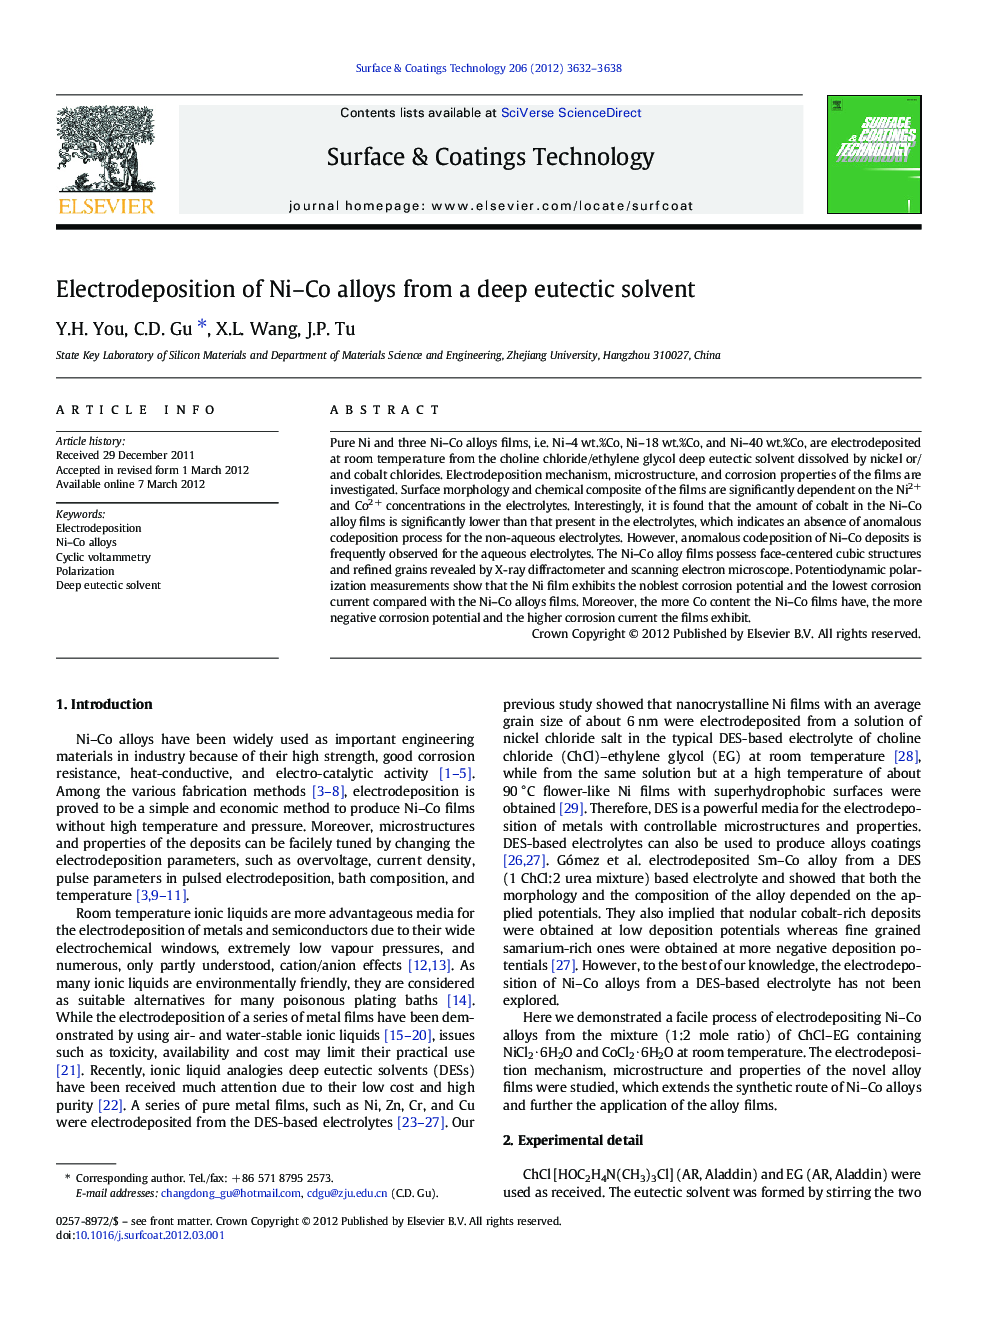 Electrodeposition of Ni–Co alloys from a deep eutectic solvent